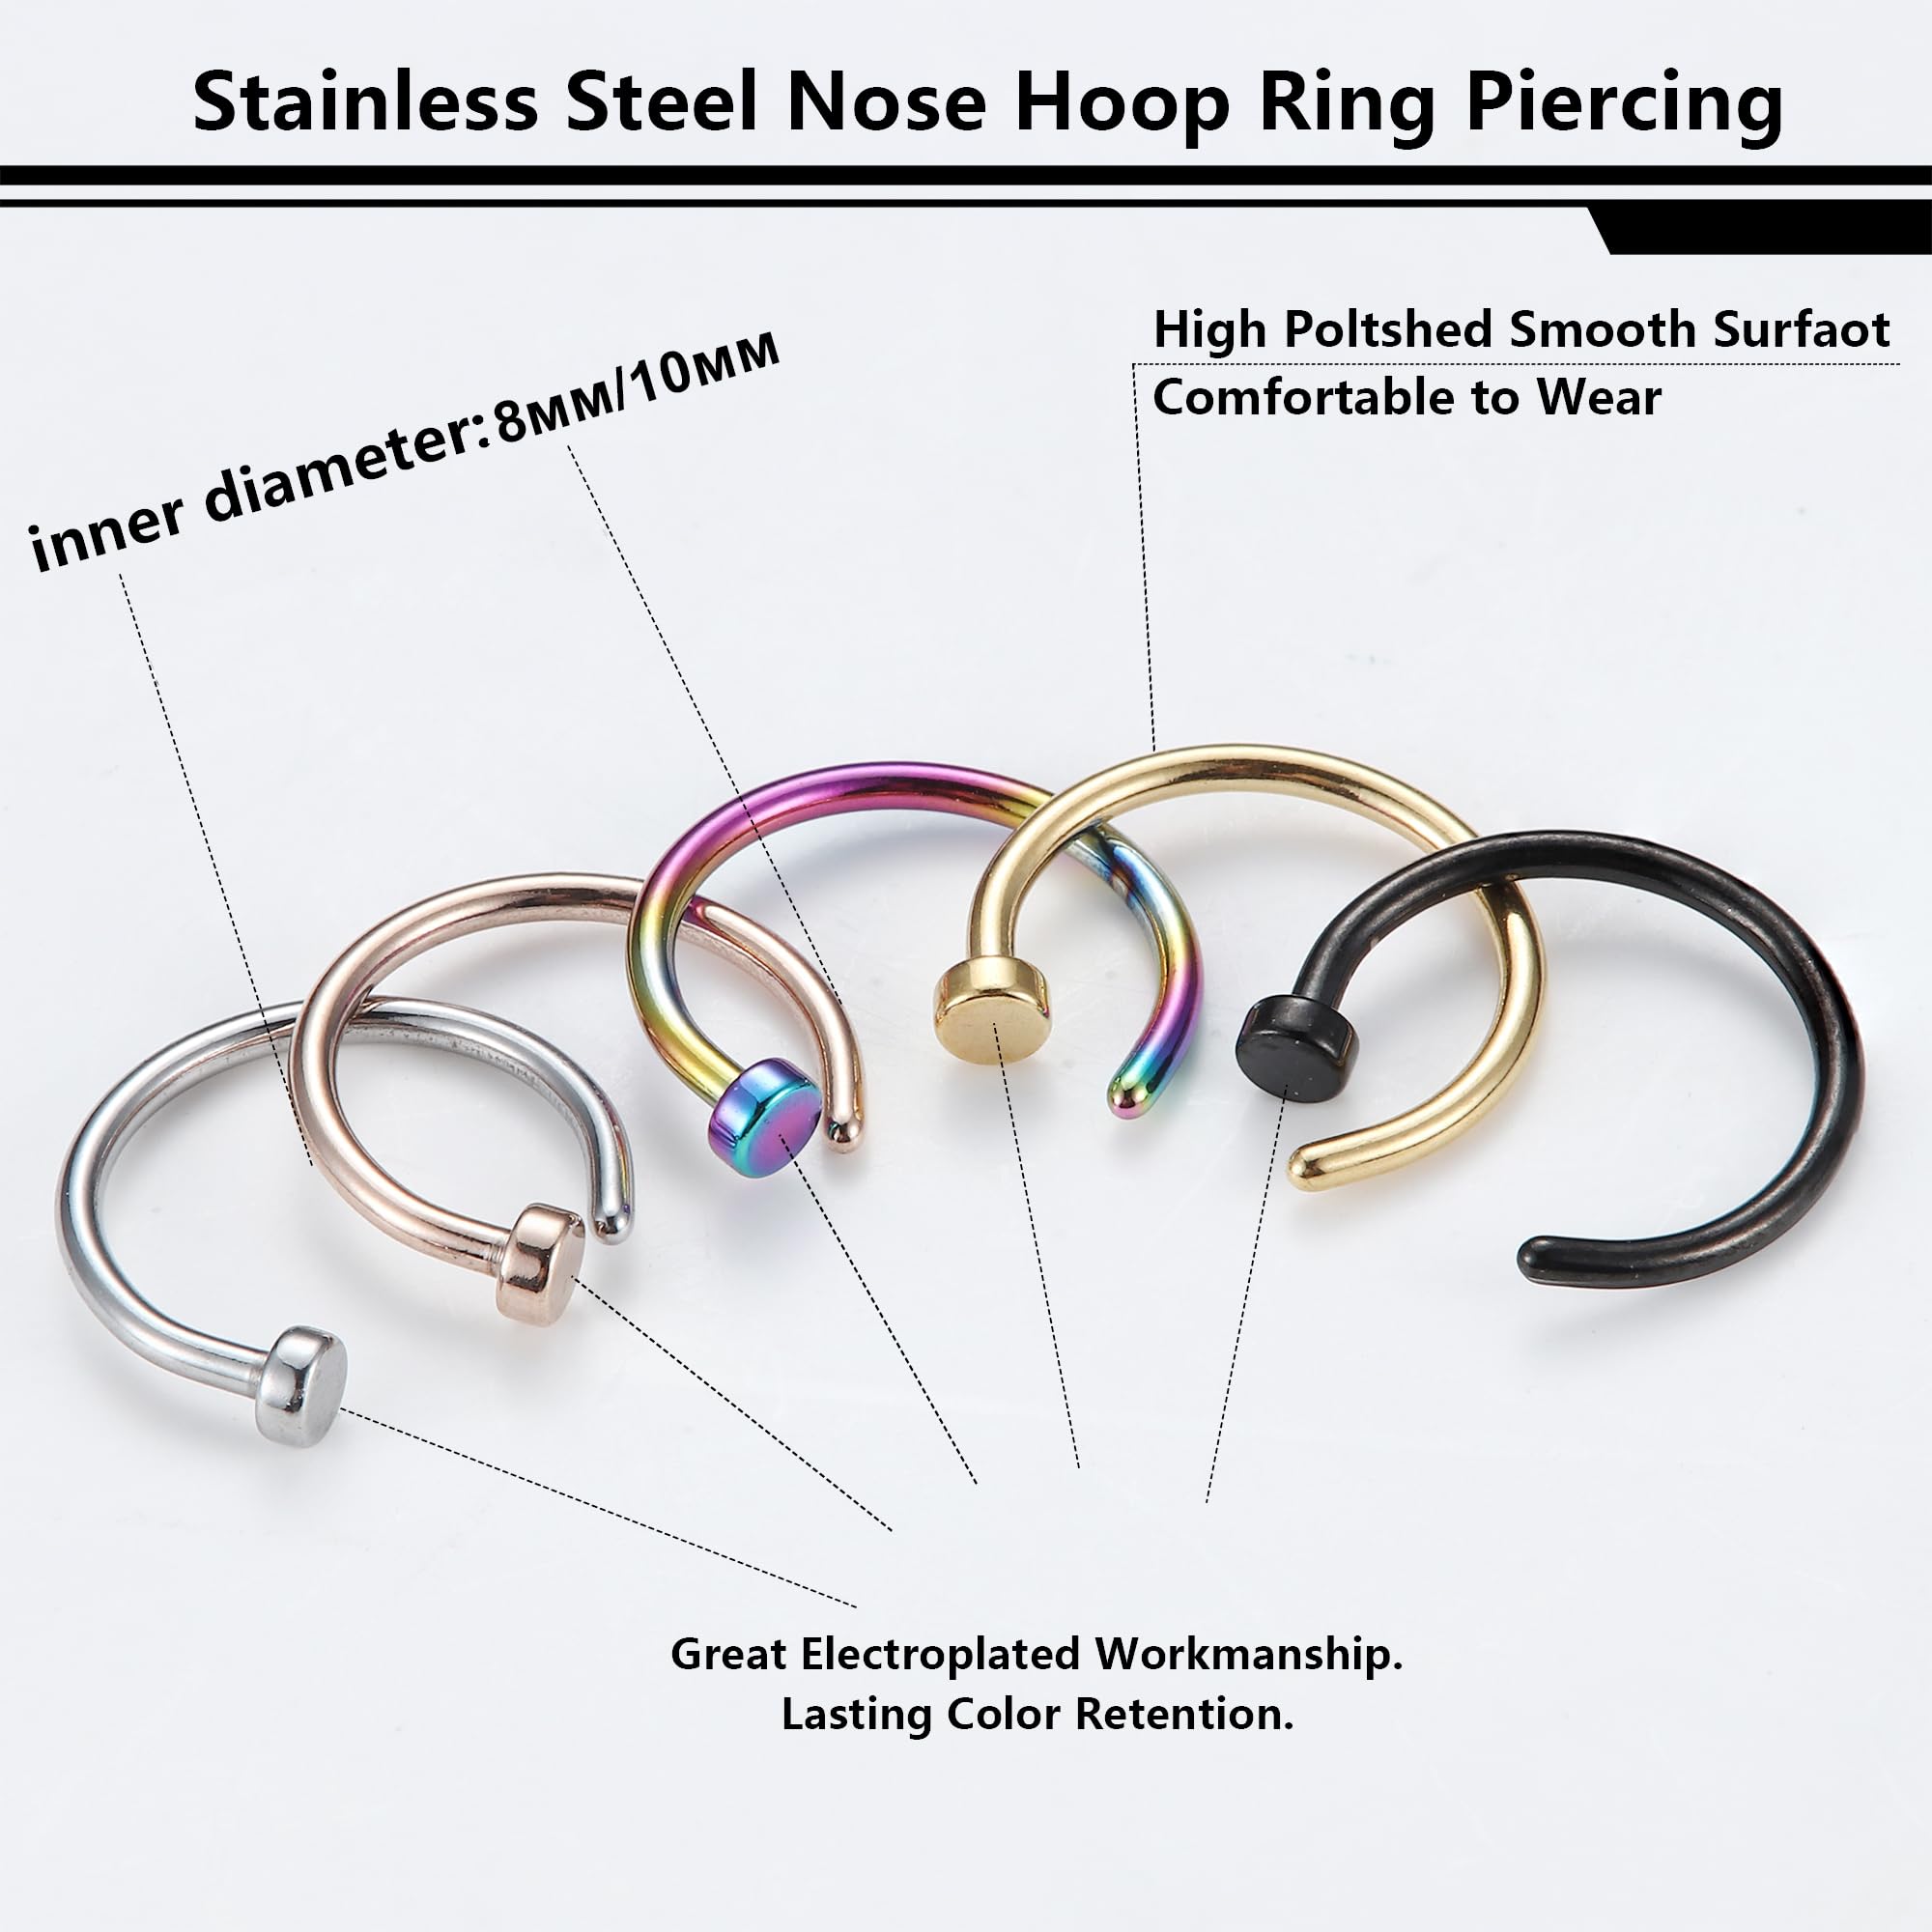 FIBO STEEL 18G-22G 5PCS Stainless Steel Body Jewelry Piercing Nose Ring Hoop for Women